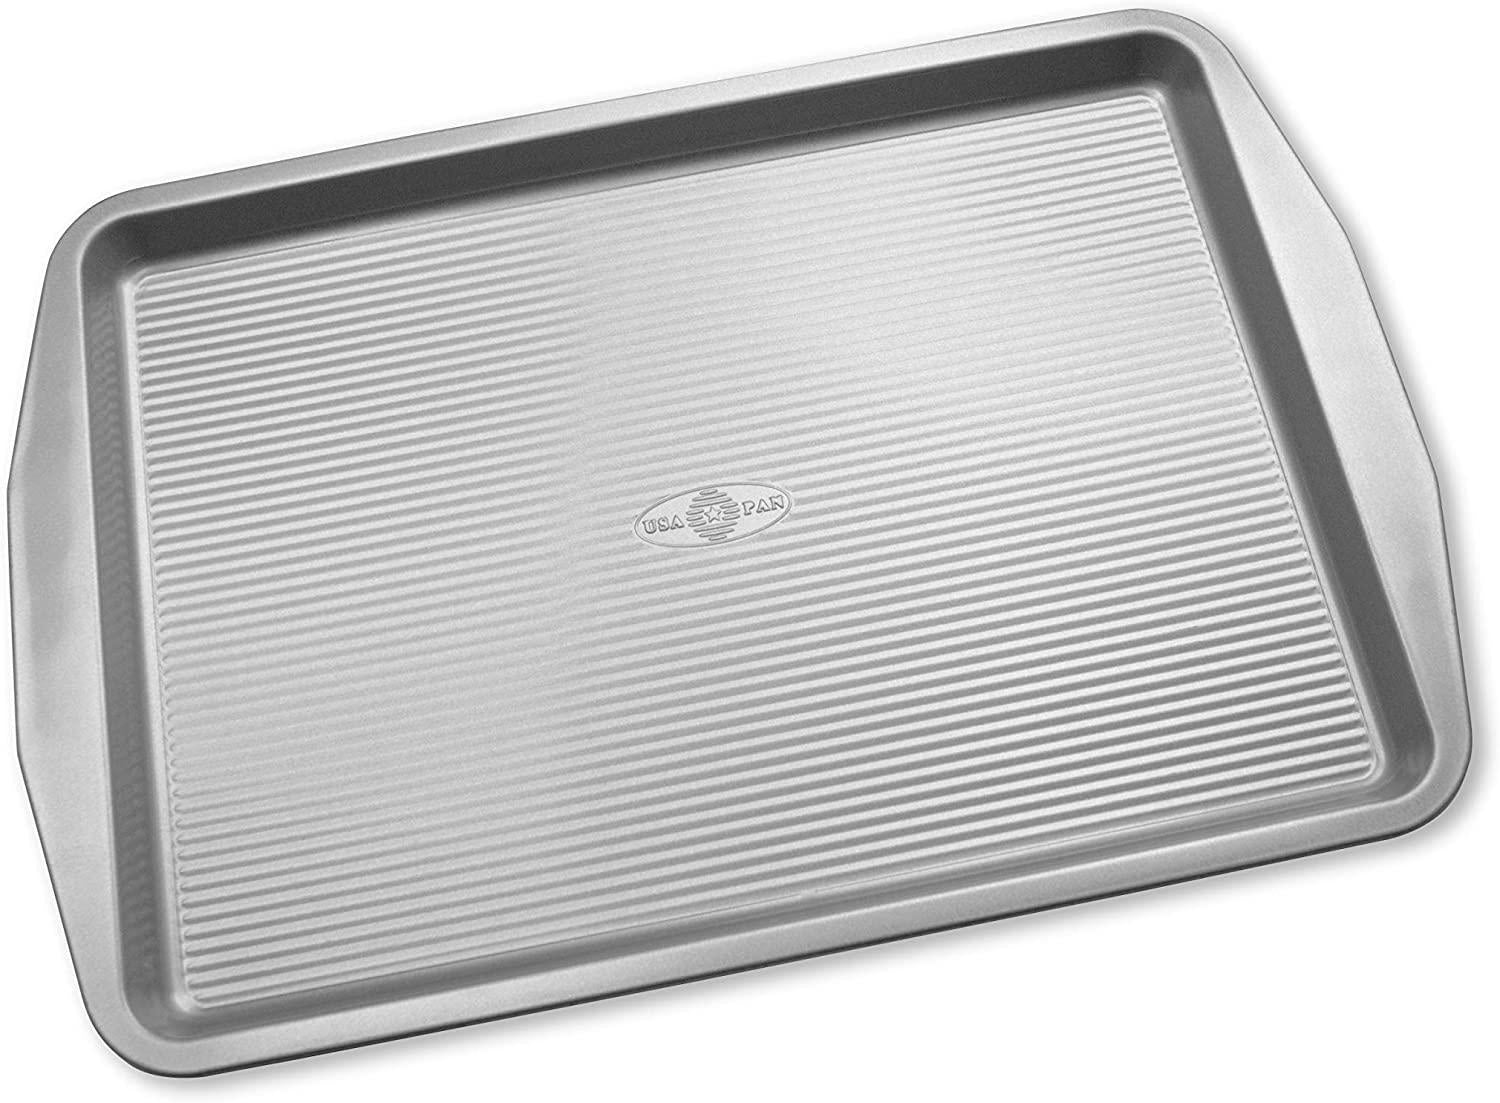  Doughmakers Great Grand Cookie Sheet: Baking Sheets: Home &  Kitchen